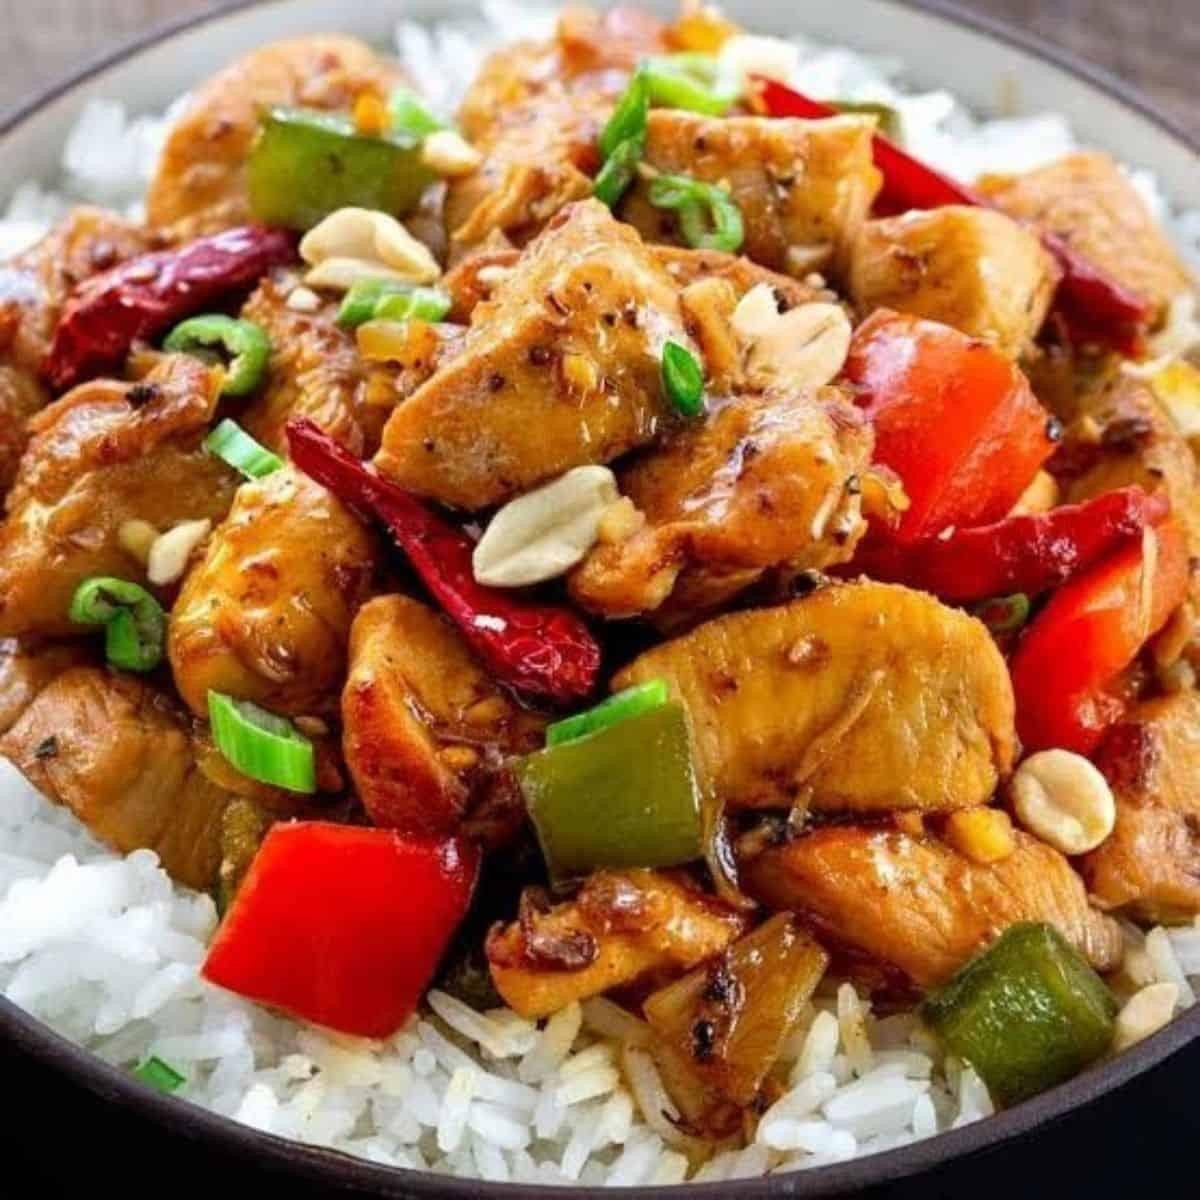 KUNG PAO CHICKEN LUNCH